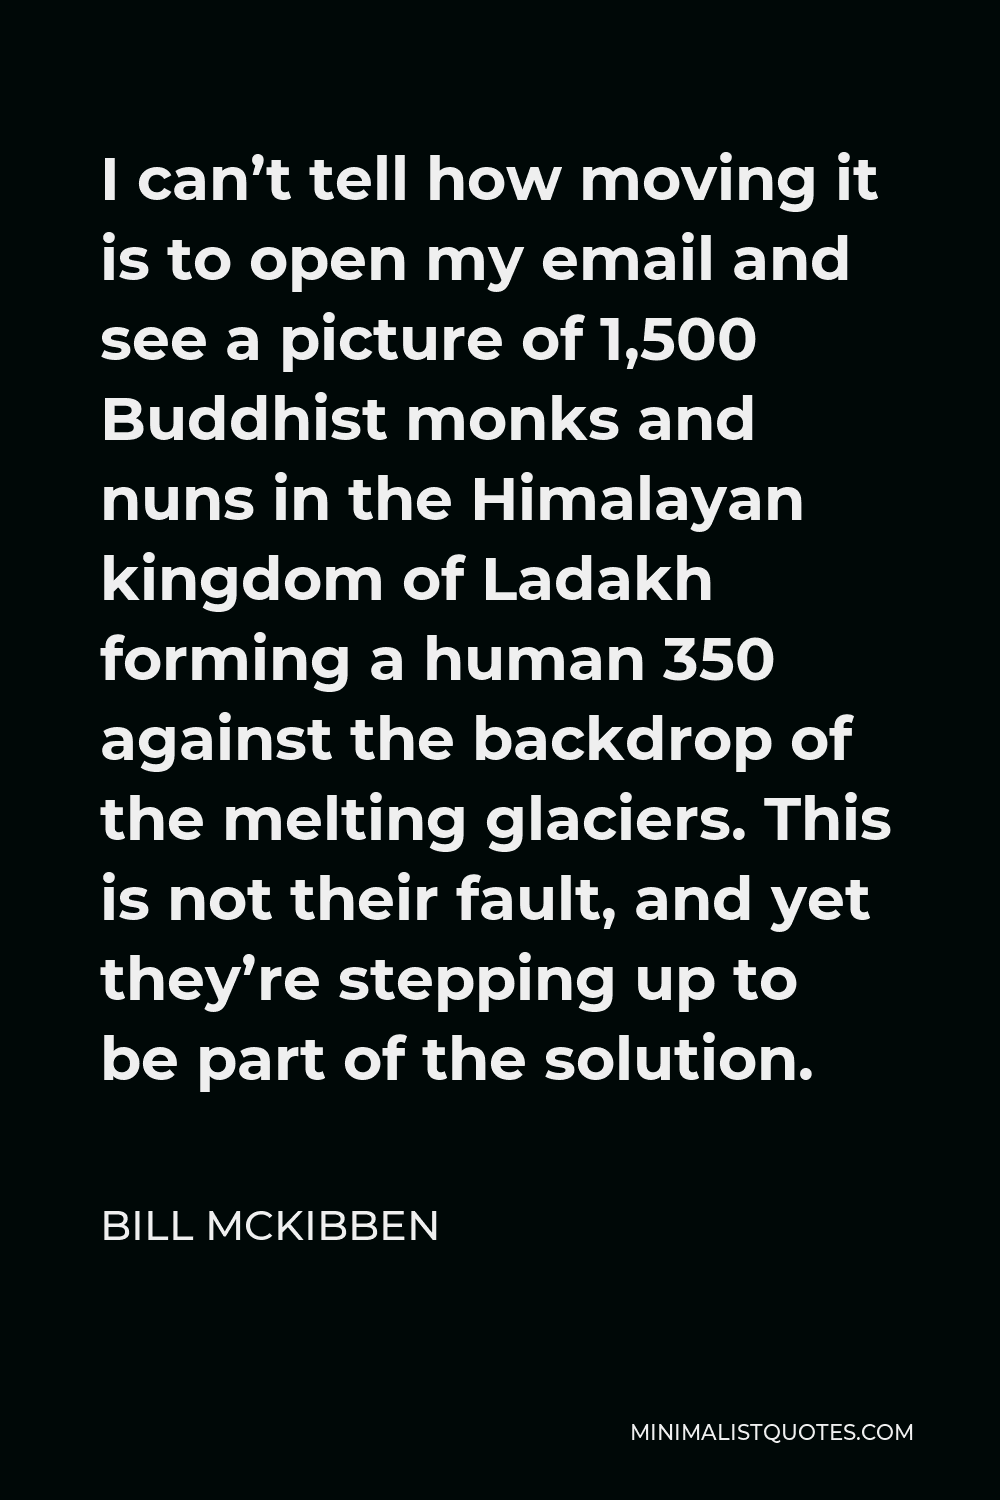 Bill McKibben Quote - I can’t tell how moving it is to open my email and see a picture of 1,500 Buddhist monks and nuns in the Himalayan kingdom of Ladakh forming a human 350 against the backdrop of the melting glaciers. This is not their fault, and yet they’re stepping up to be part of the solution.